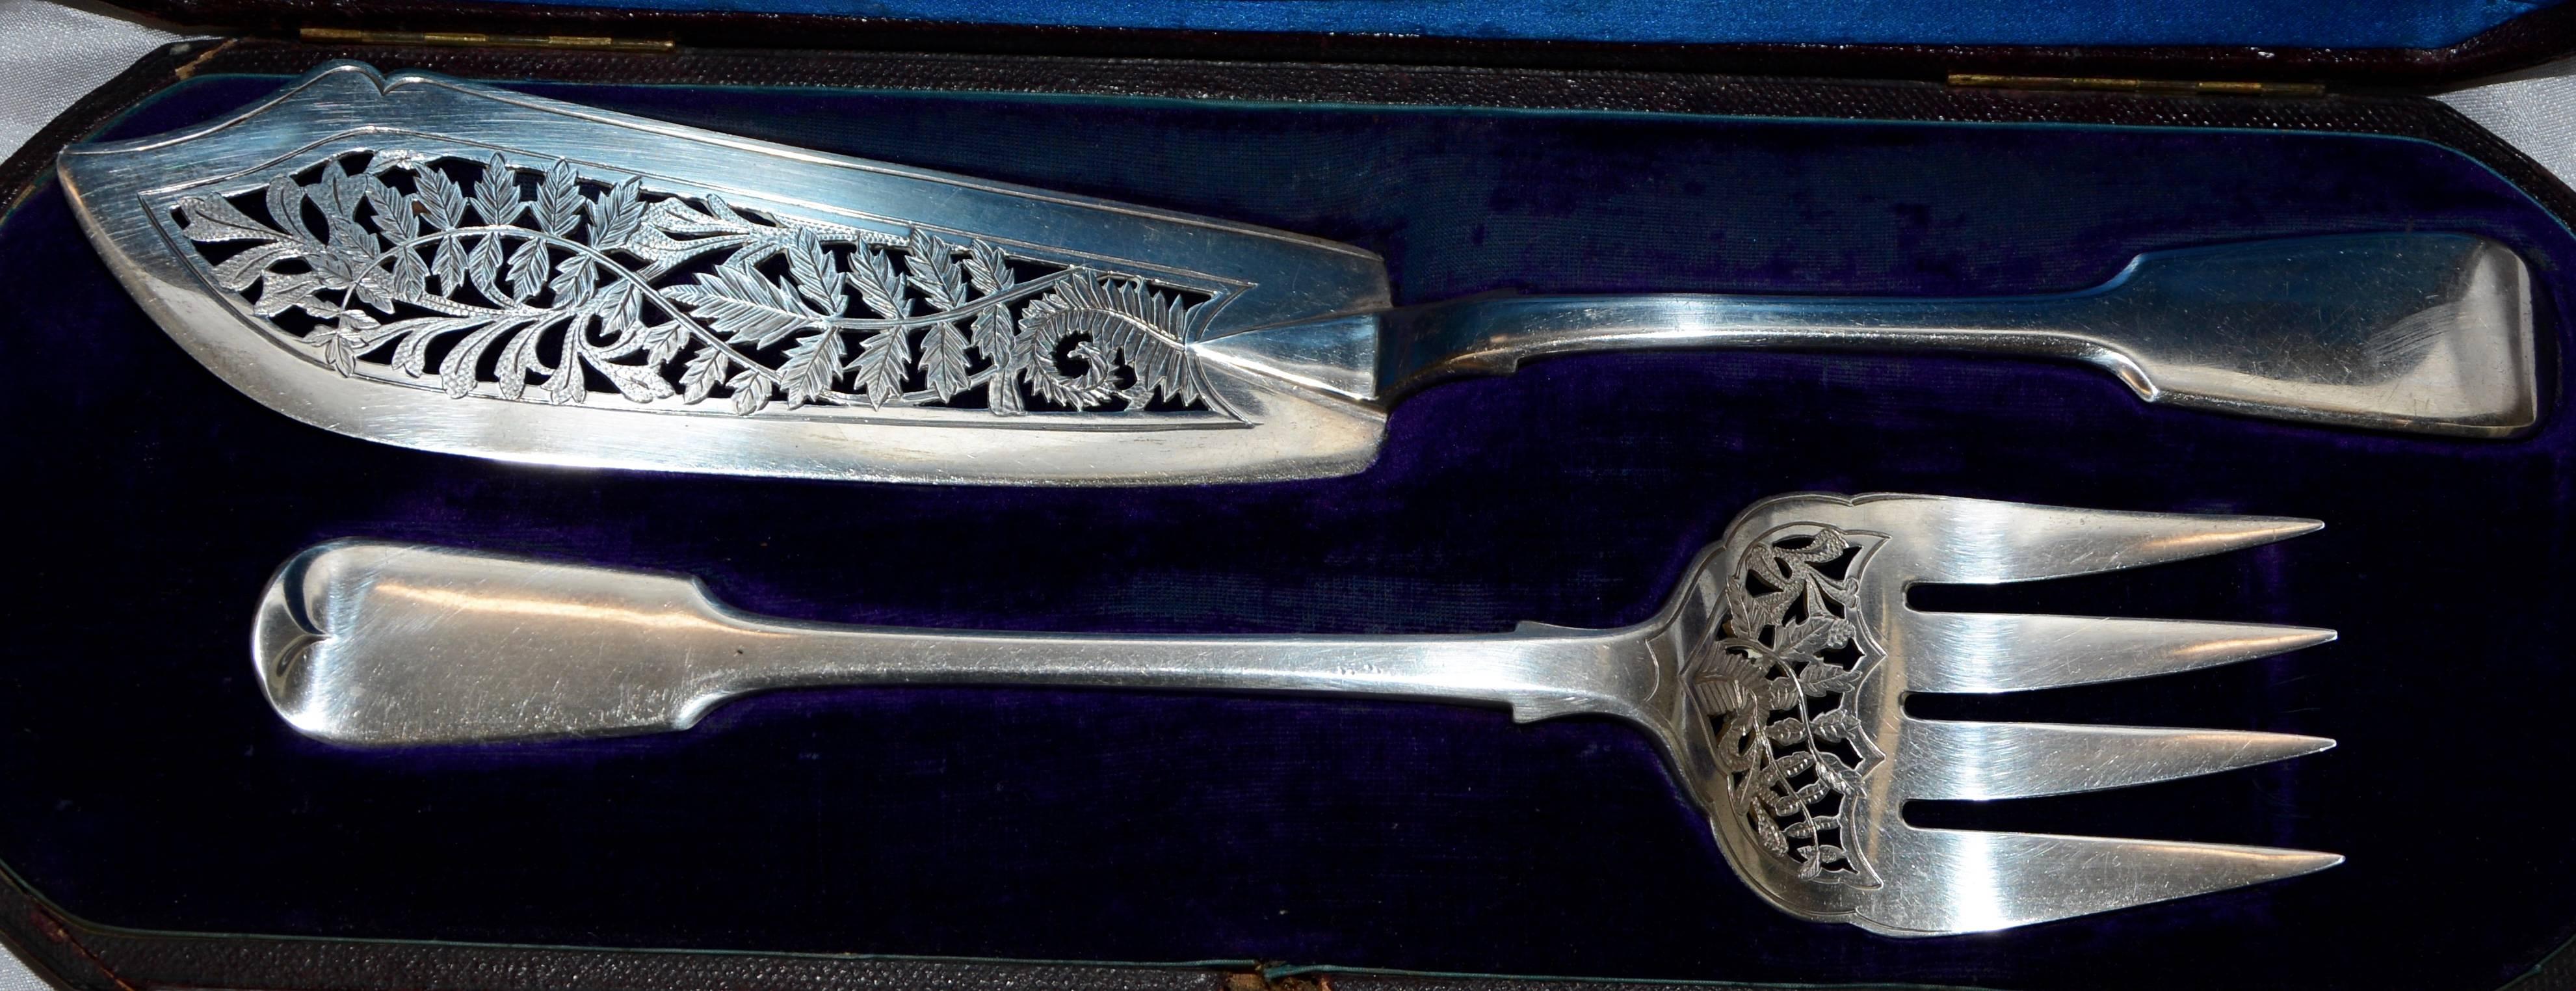 The engraving style on the cut-out of this lovely sterling silver fish set by the George Angell Co. of London are exquisite! Ferns and leaves are intertwined on each piece. The hallmarks identify the pieces as being made in London in 1875. They